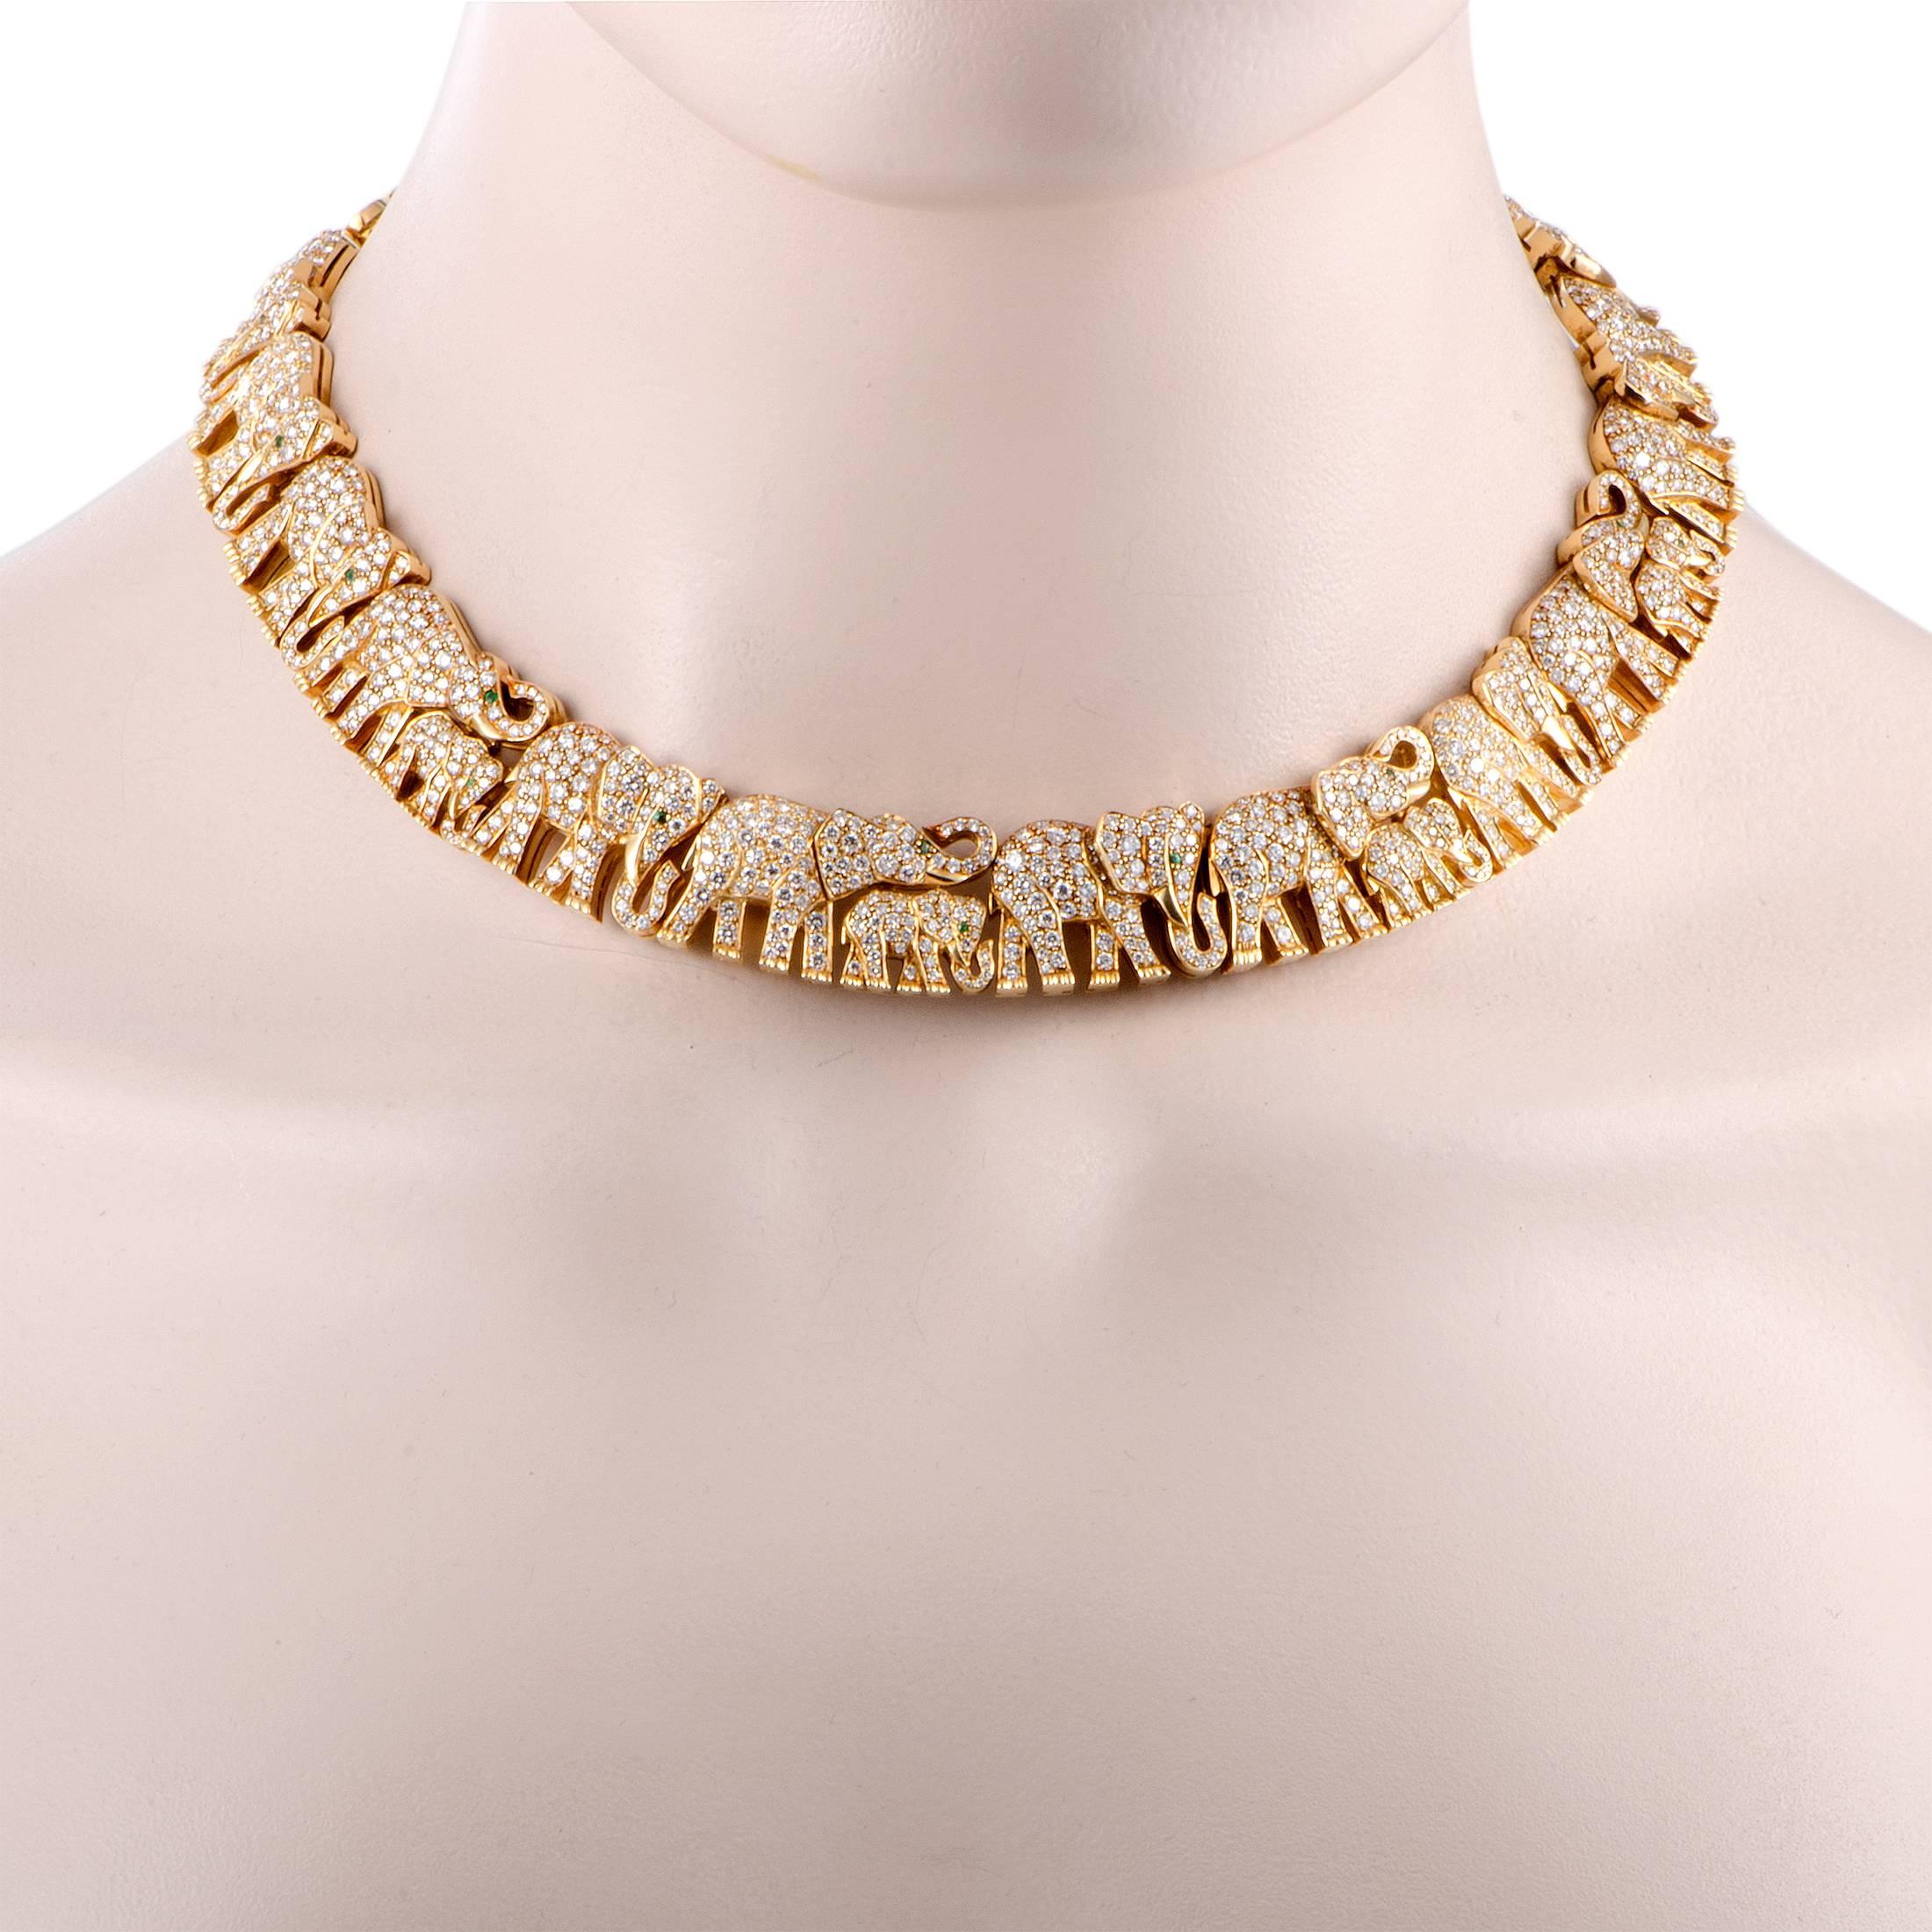 Depicting a plethora of elephants in the most luxurious manner, this ravishing necklace beautifully embodies the enticing allure of African wildlife. Designed by Cartier, the necklace is expertly crafted from attractive 18K yellow gold and lavishly